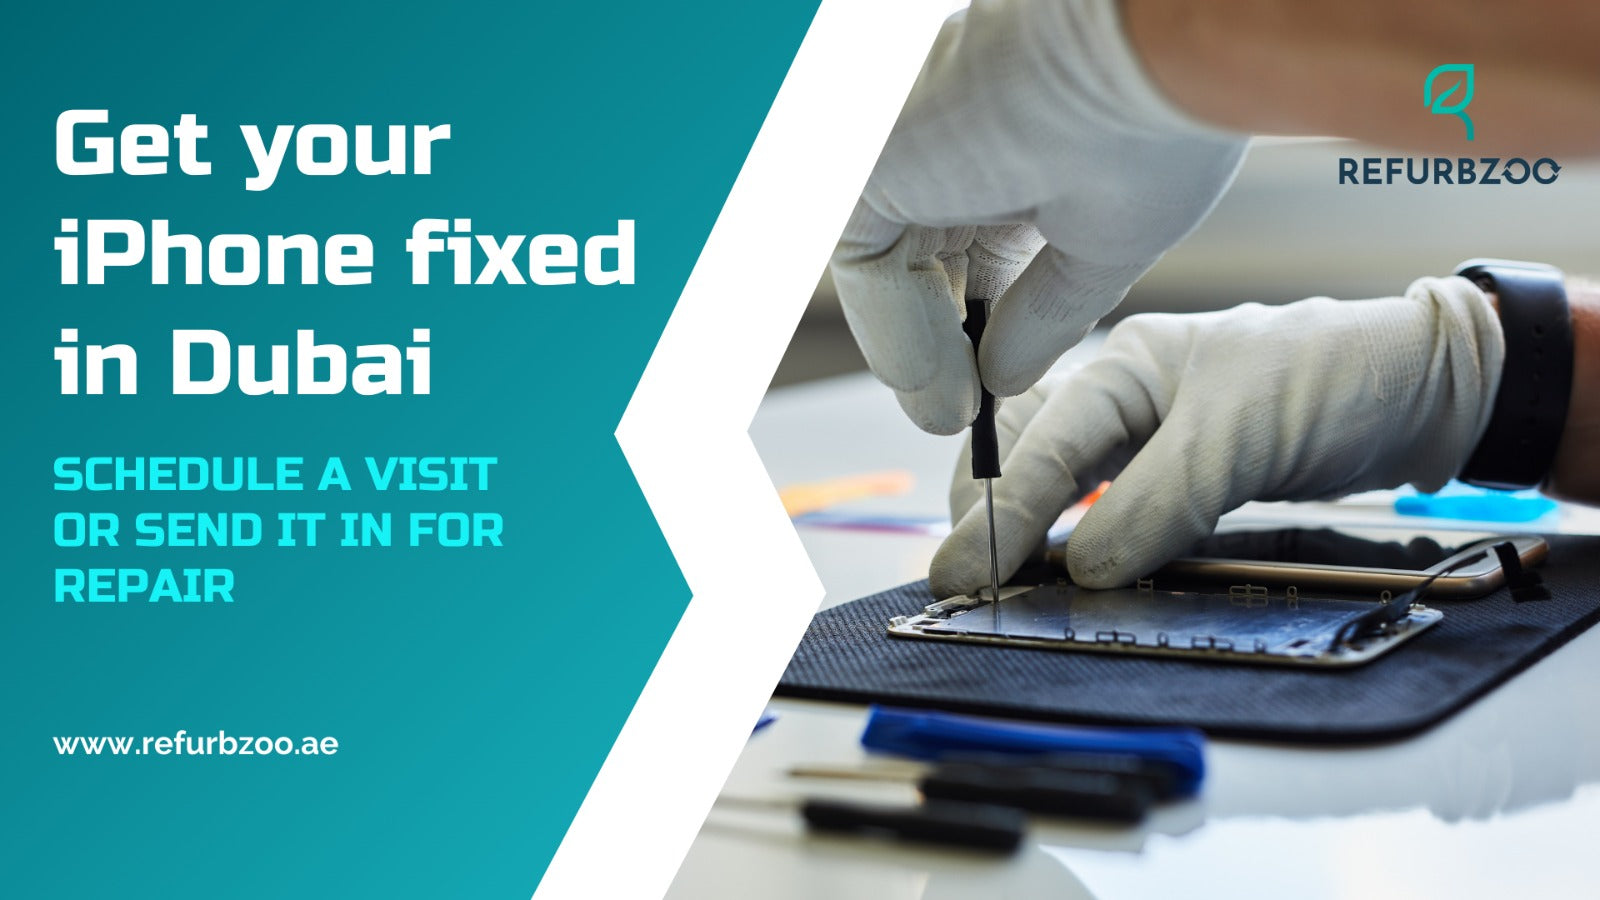 Get your iPhone fixed in Dubai: Schedule a visit or send it in for Repair